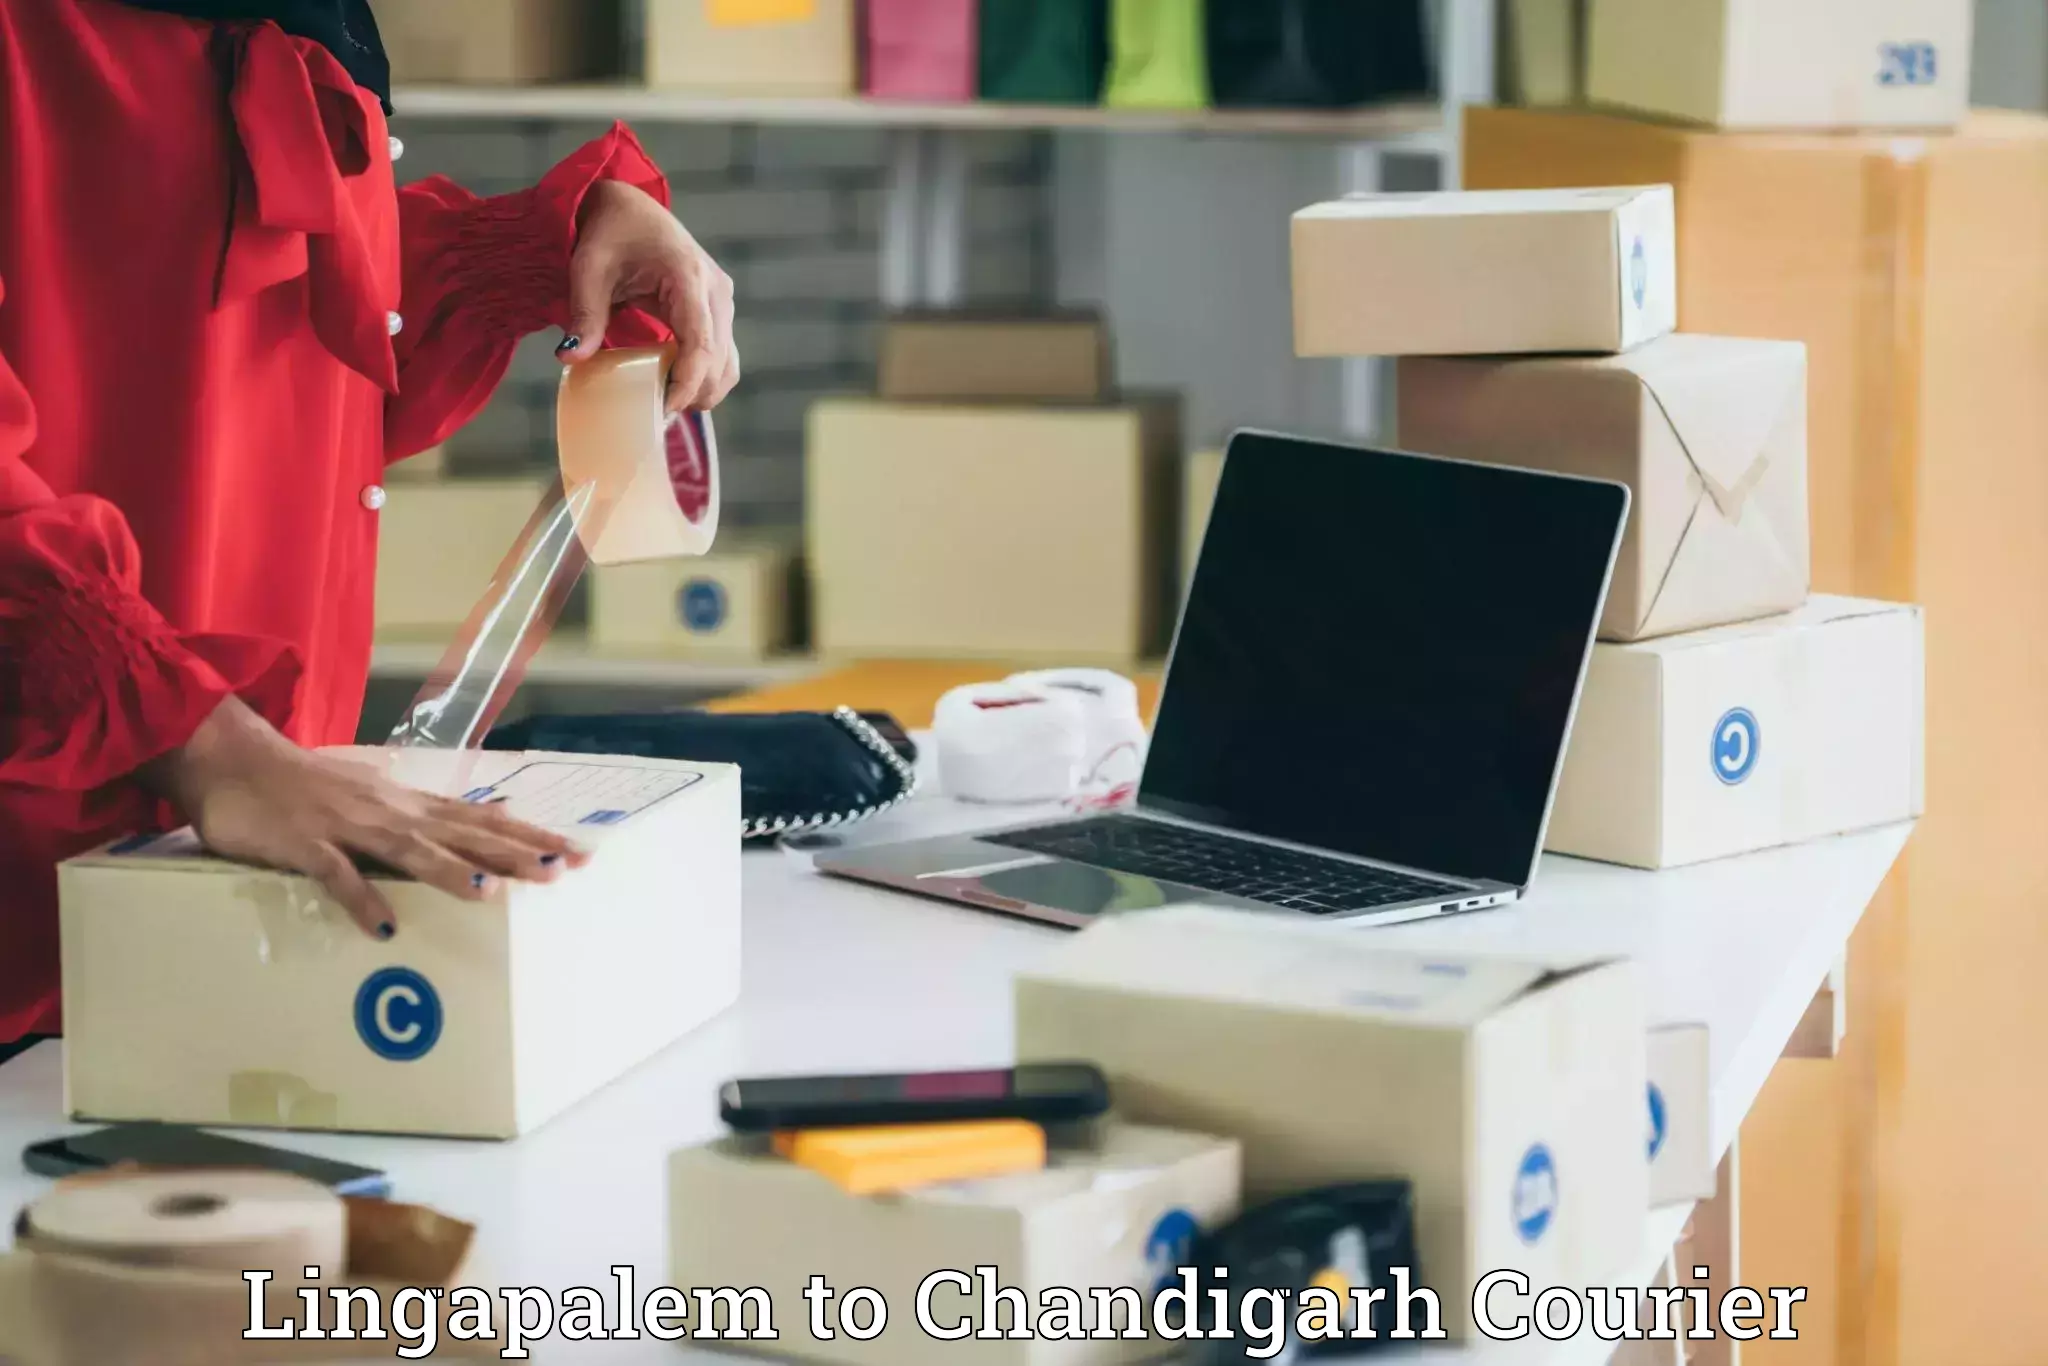 High-speed parcel service Lingapalem to Chandigarh